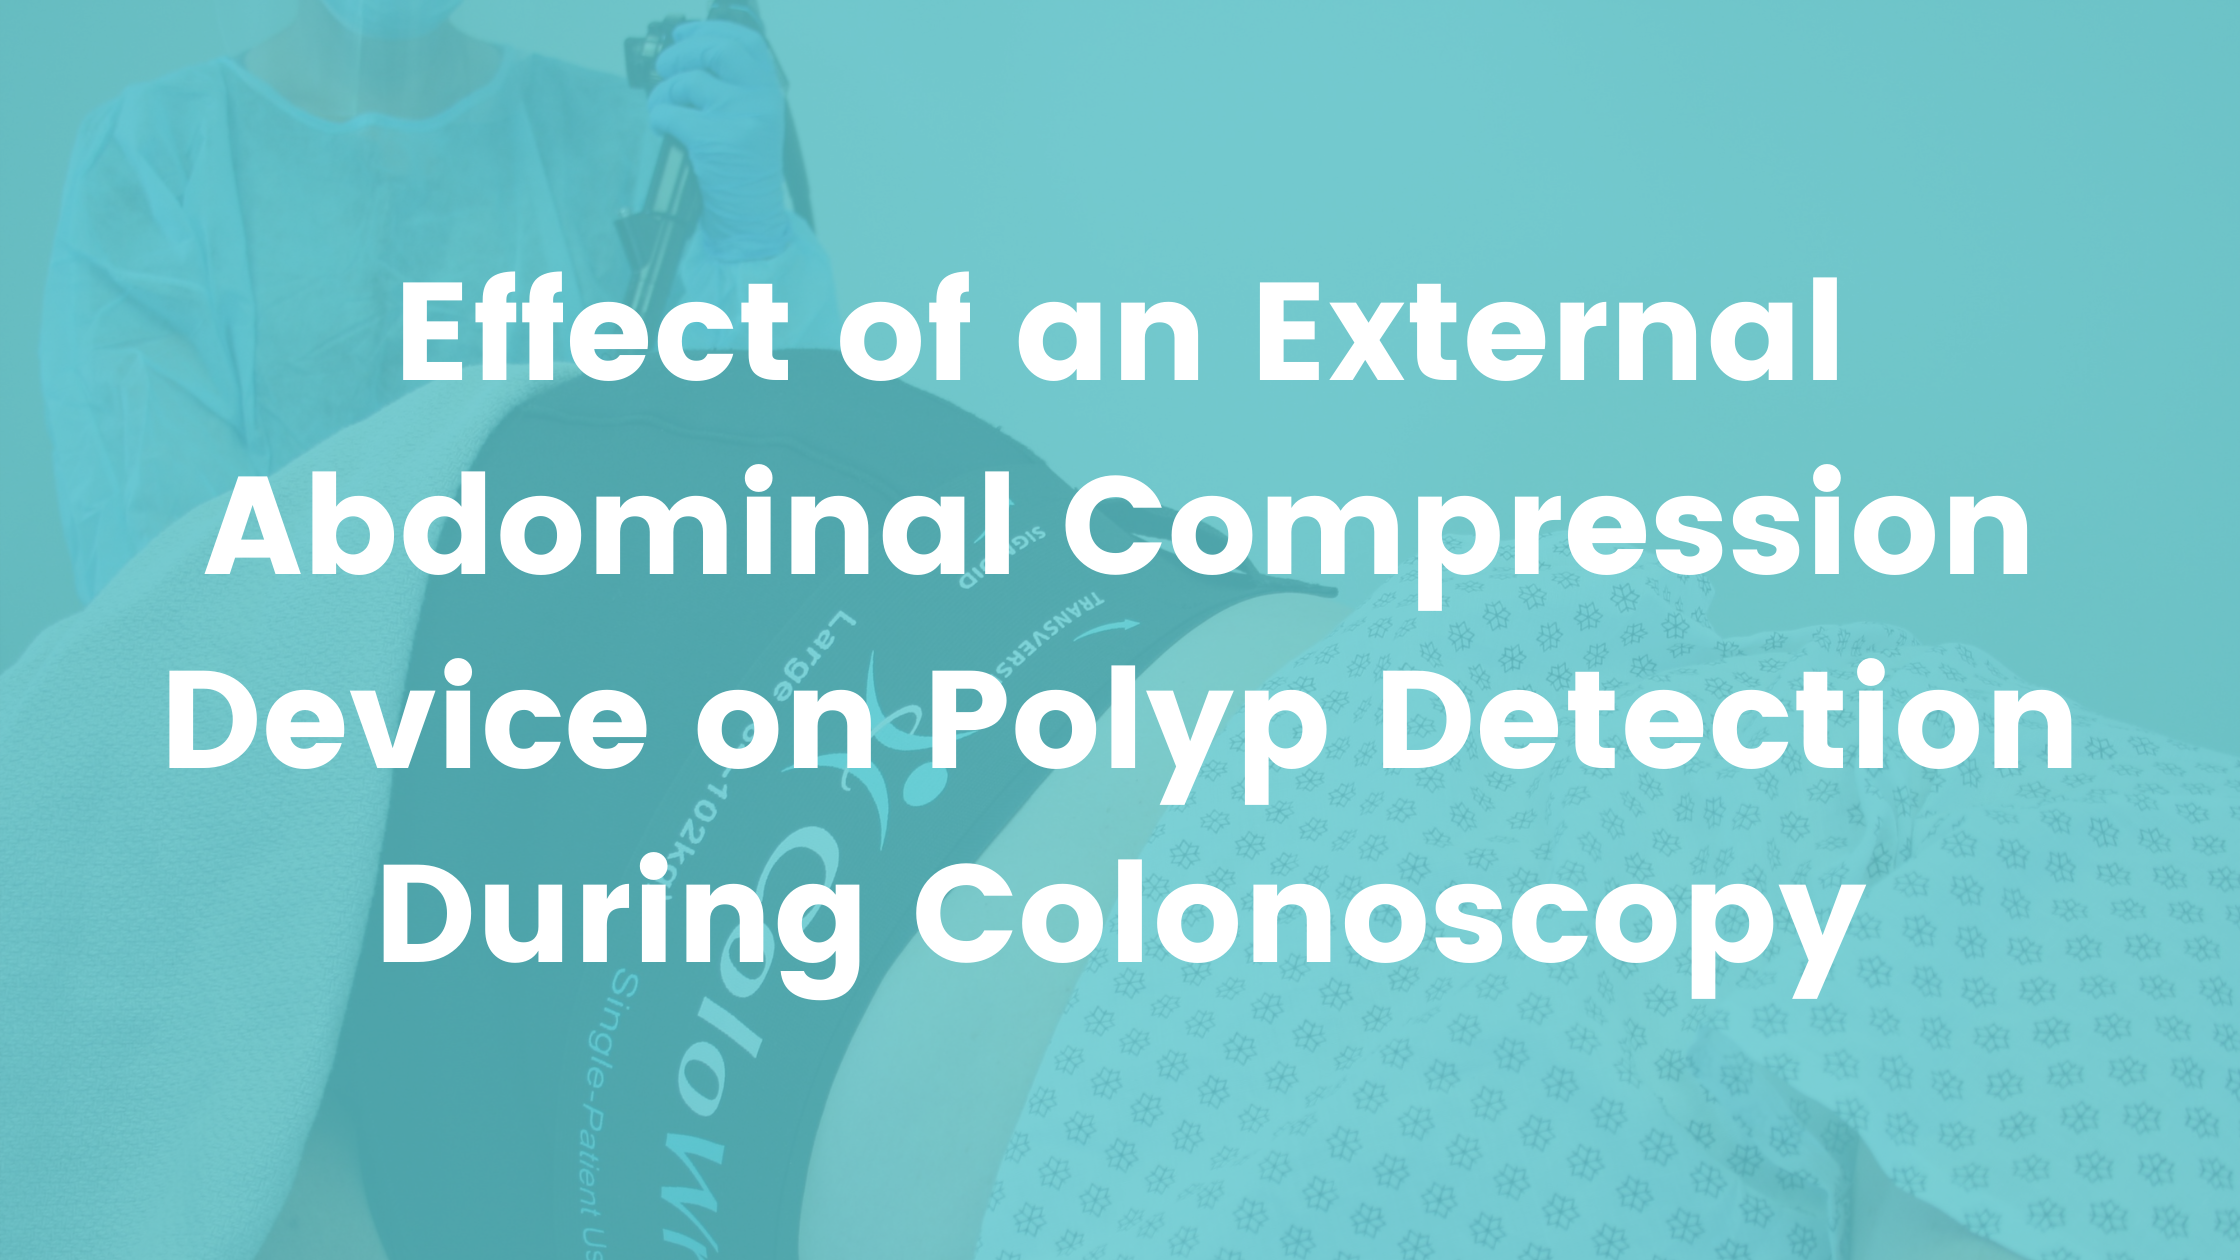 Effect of External Abdominal Compression Device on Polyp Detection During Colonoscopy